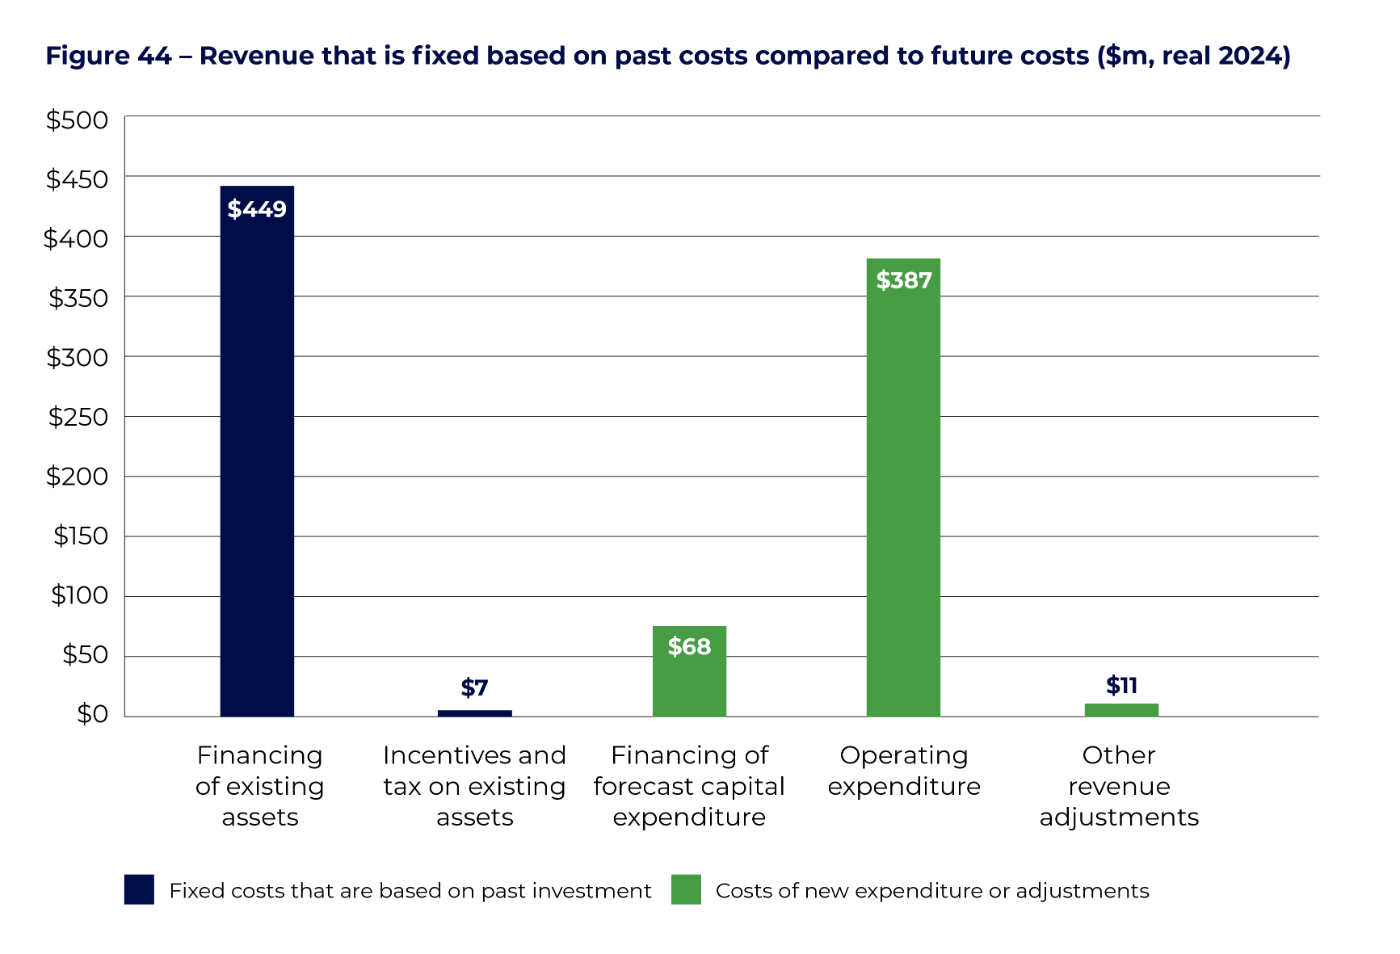 Figure 44 - Revenue that is fixed based on past costs compared to future costs